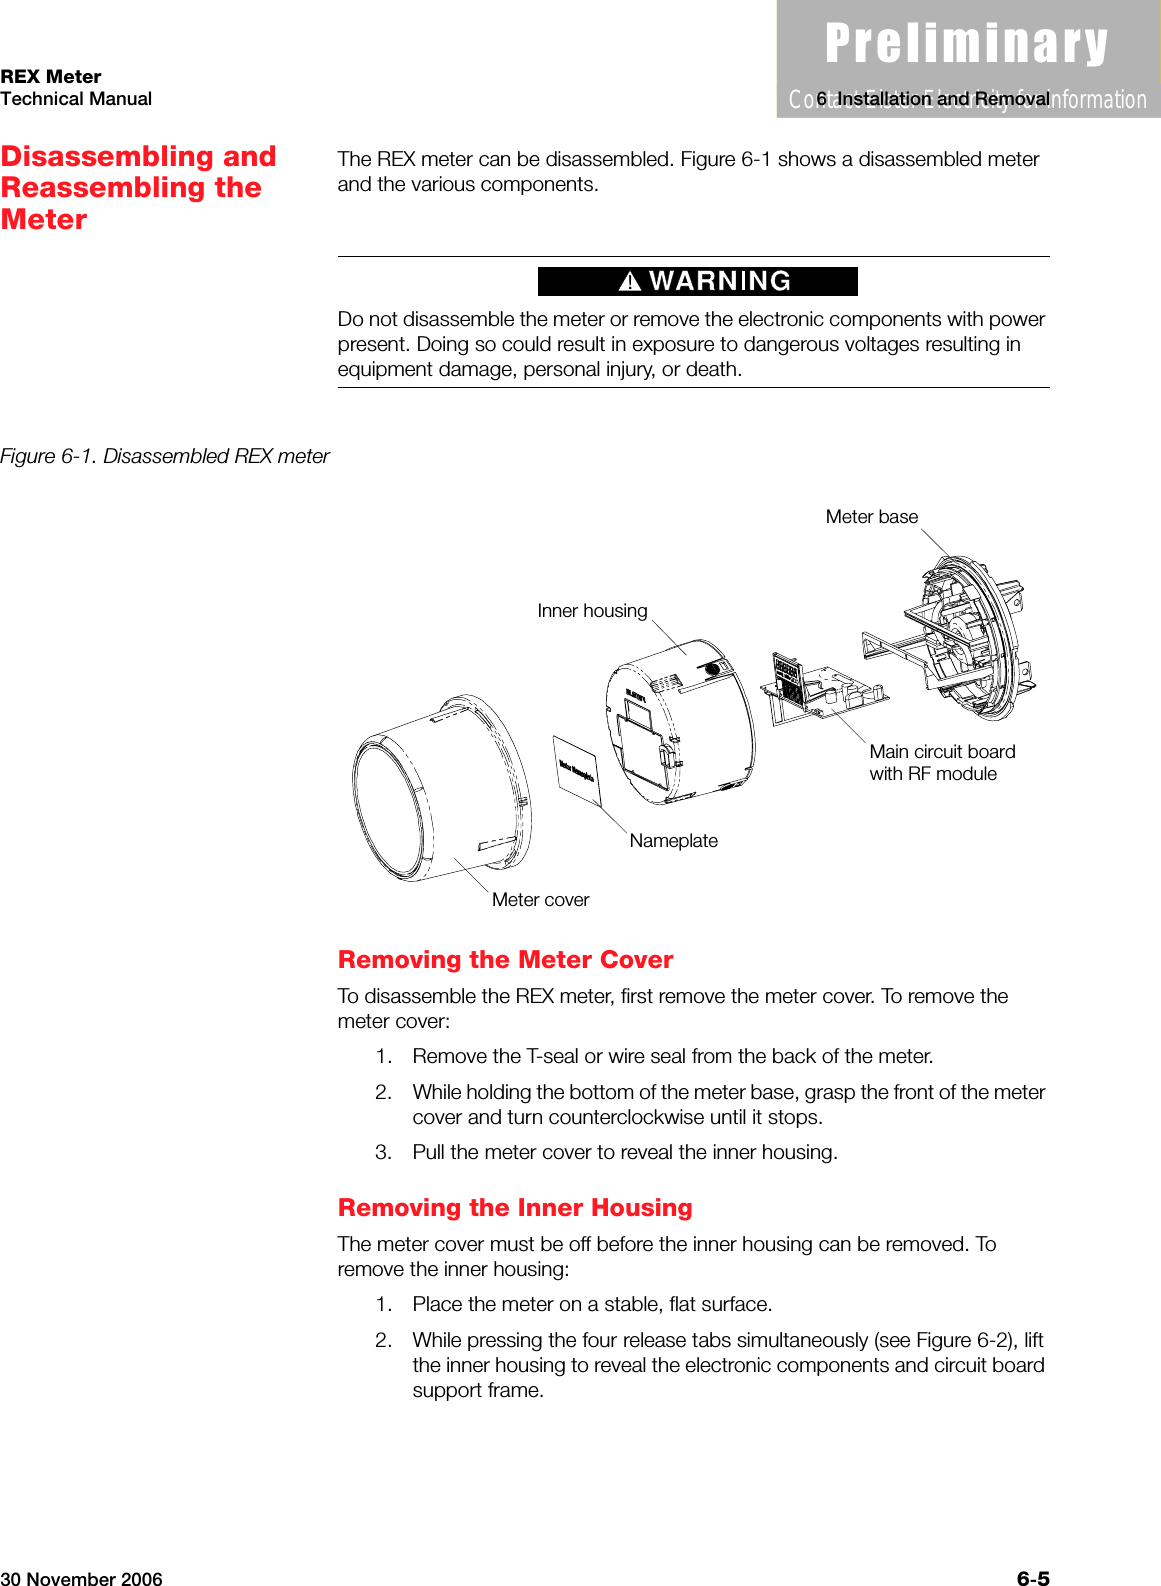 3UHOLPLQDU\Contact Elster Electricity for information30 November 2006 6-5REX MeterTechnical Manual 6  Installation and RemovalDisassembling and Reassembling the MeterThe REX meter can be disassembled. Figure 6-1 shows a disassembled meter and the various components. Do not disassemble the meter or remove the electronic components with power present. Doing so could result in exposure to dangerous voltages resulting in equipment damage, personal injury, or death.Figure 6-1. Disassembled REX meterRemoving the Meter CoverTo disassemble the REX meter, first remove the meter cover. To remove the meter cover:1. Remove the T-seal or wire seal from the back of the meter.2. While holding the bottom of the meter base, grasp the front of the meter cover and turn counterclockwise until it stops.3. Pull the meter cover to reveal the inner housing.Removing the Inner HousingThe meter cover must be off before the inner housing can be removed. To remove the inner housing:1. Place the meter on a stable, flat surface.2. While pressing the four release tabs simultaneously (see Figure 6-2), lift the inner housing to reveal the electronic components and circuit board support frame.Meter coverNameplateInner housingMain circuit boardwith RF moduleMeter base